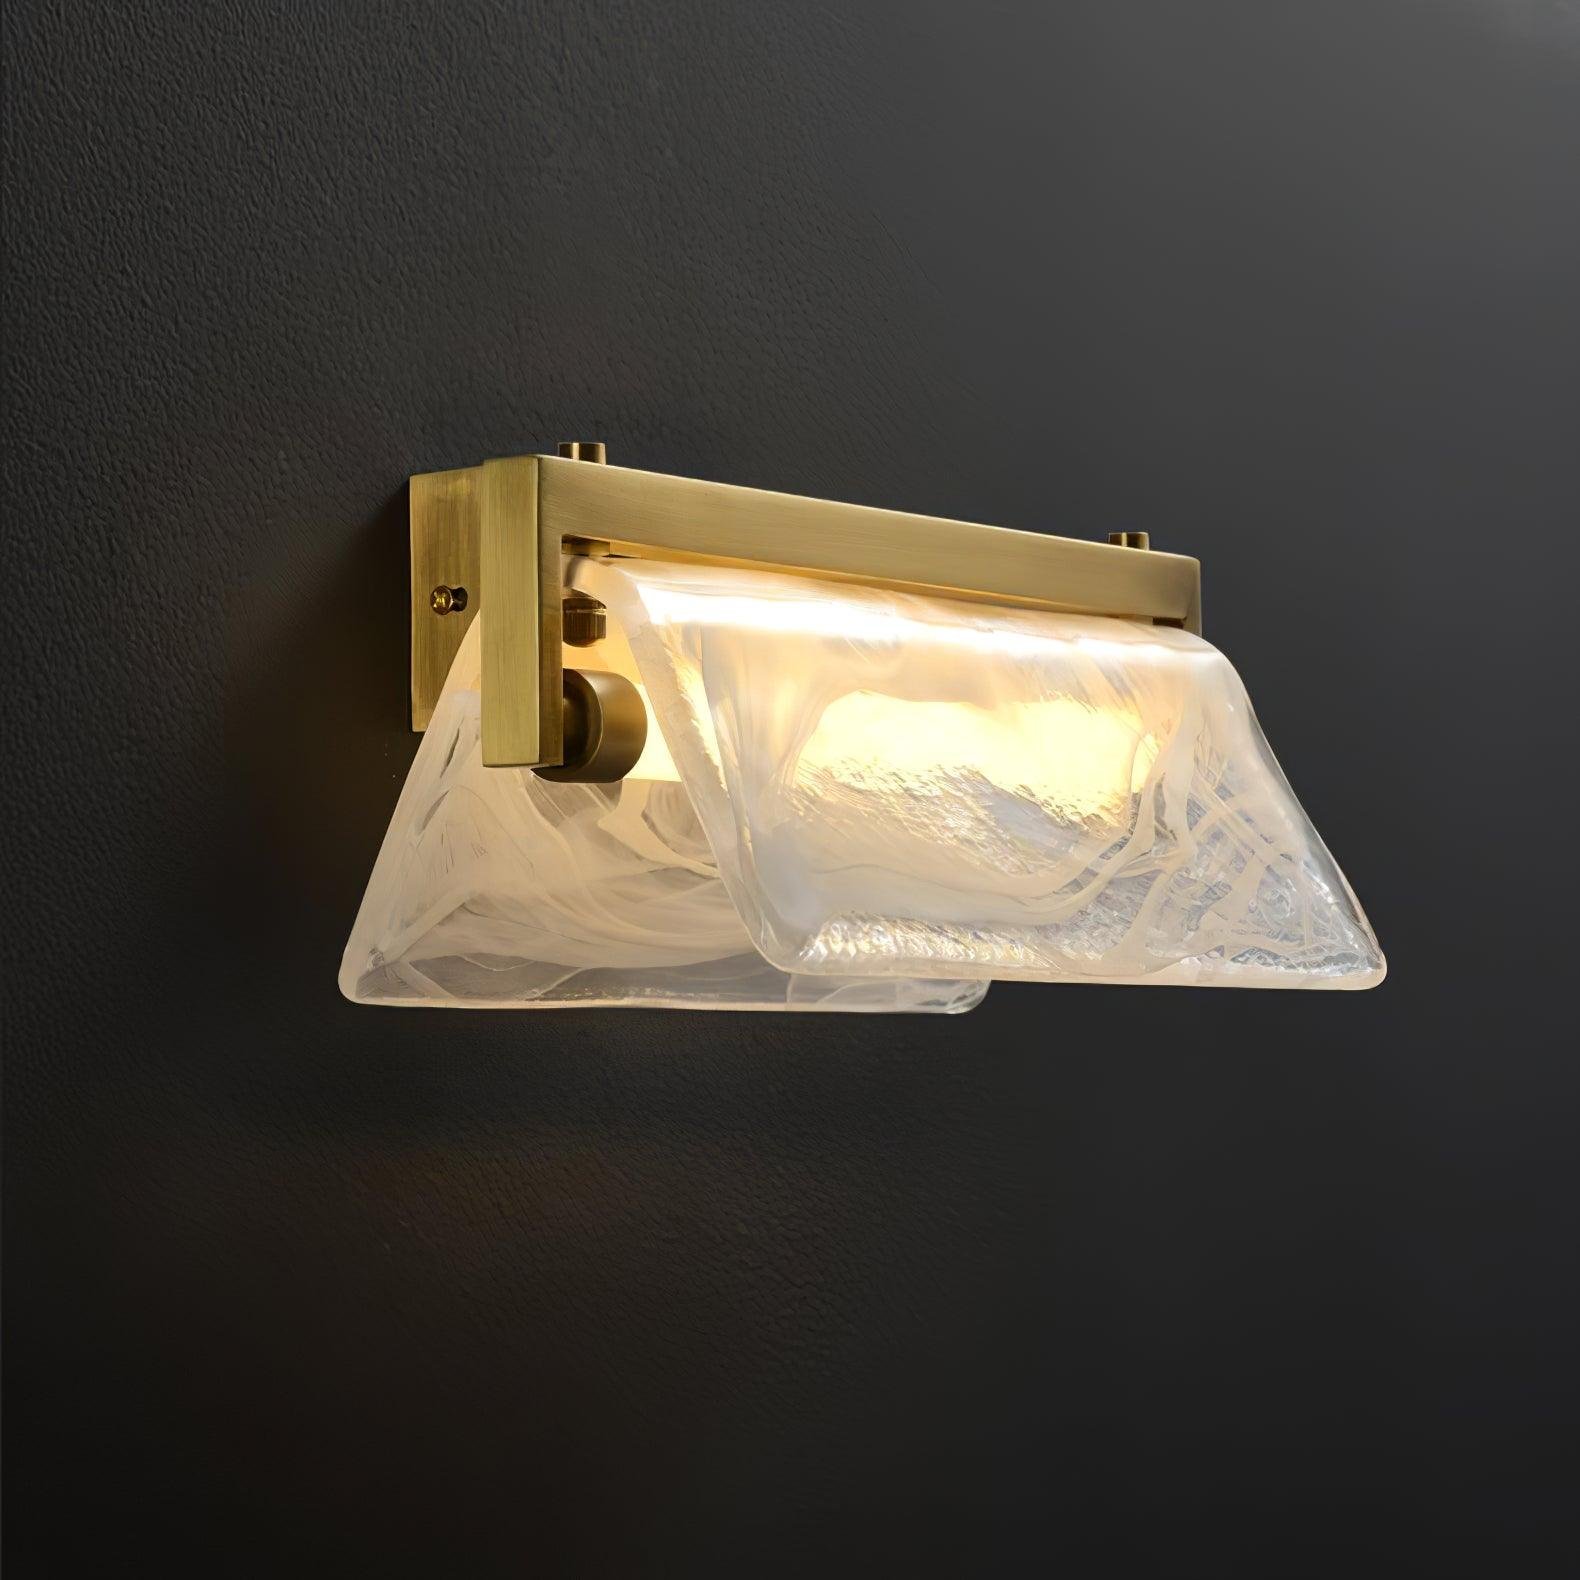 Cloud Fog Wall Lamp in Polished Brass, Cool White, L 10.2″ x H 4.7″ (26cm x 12cm)